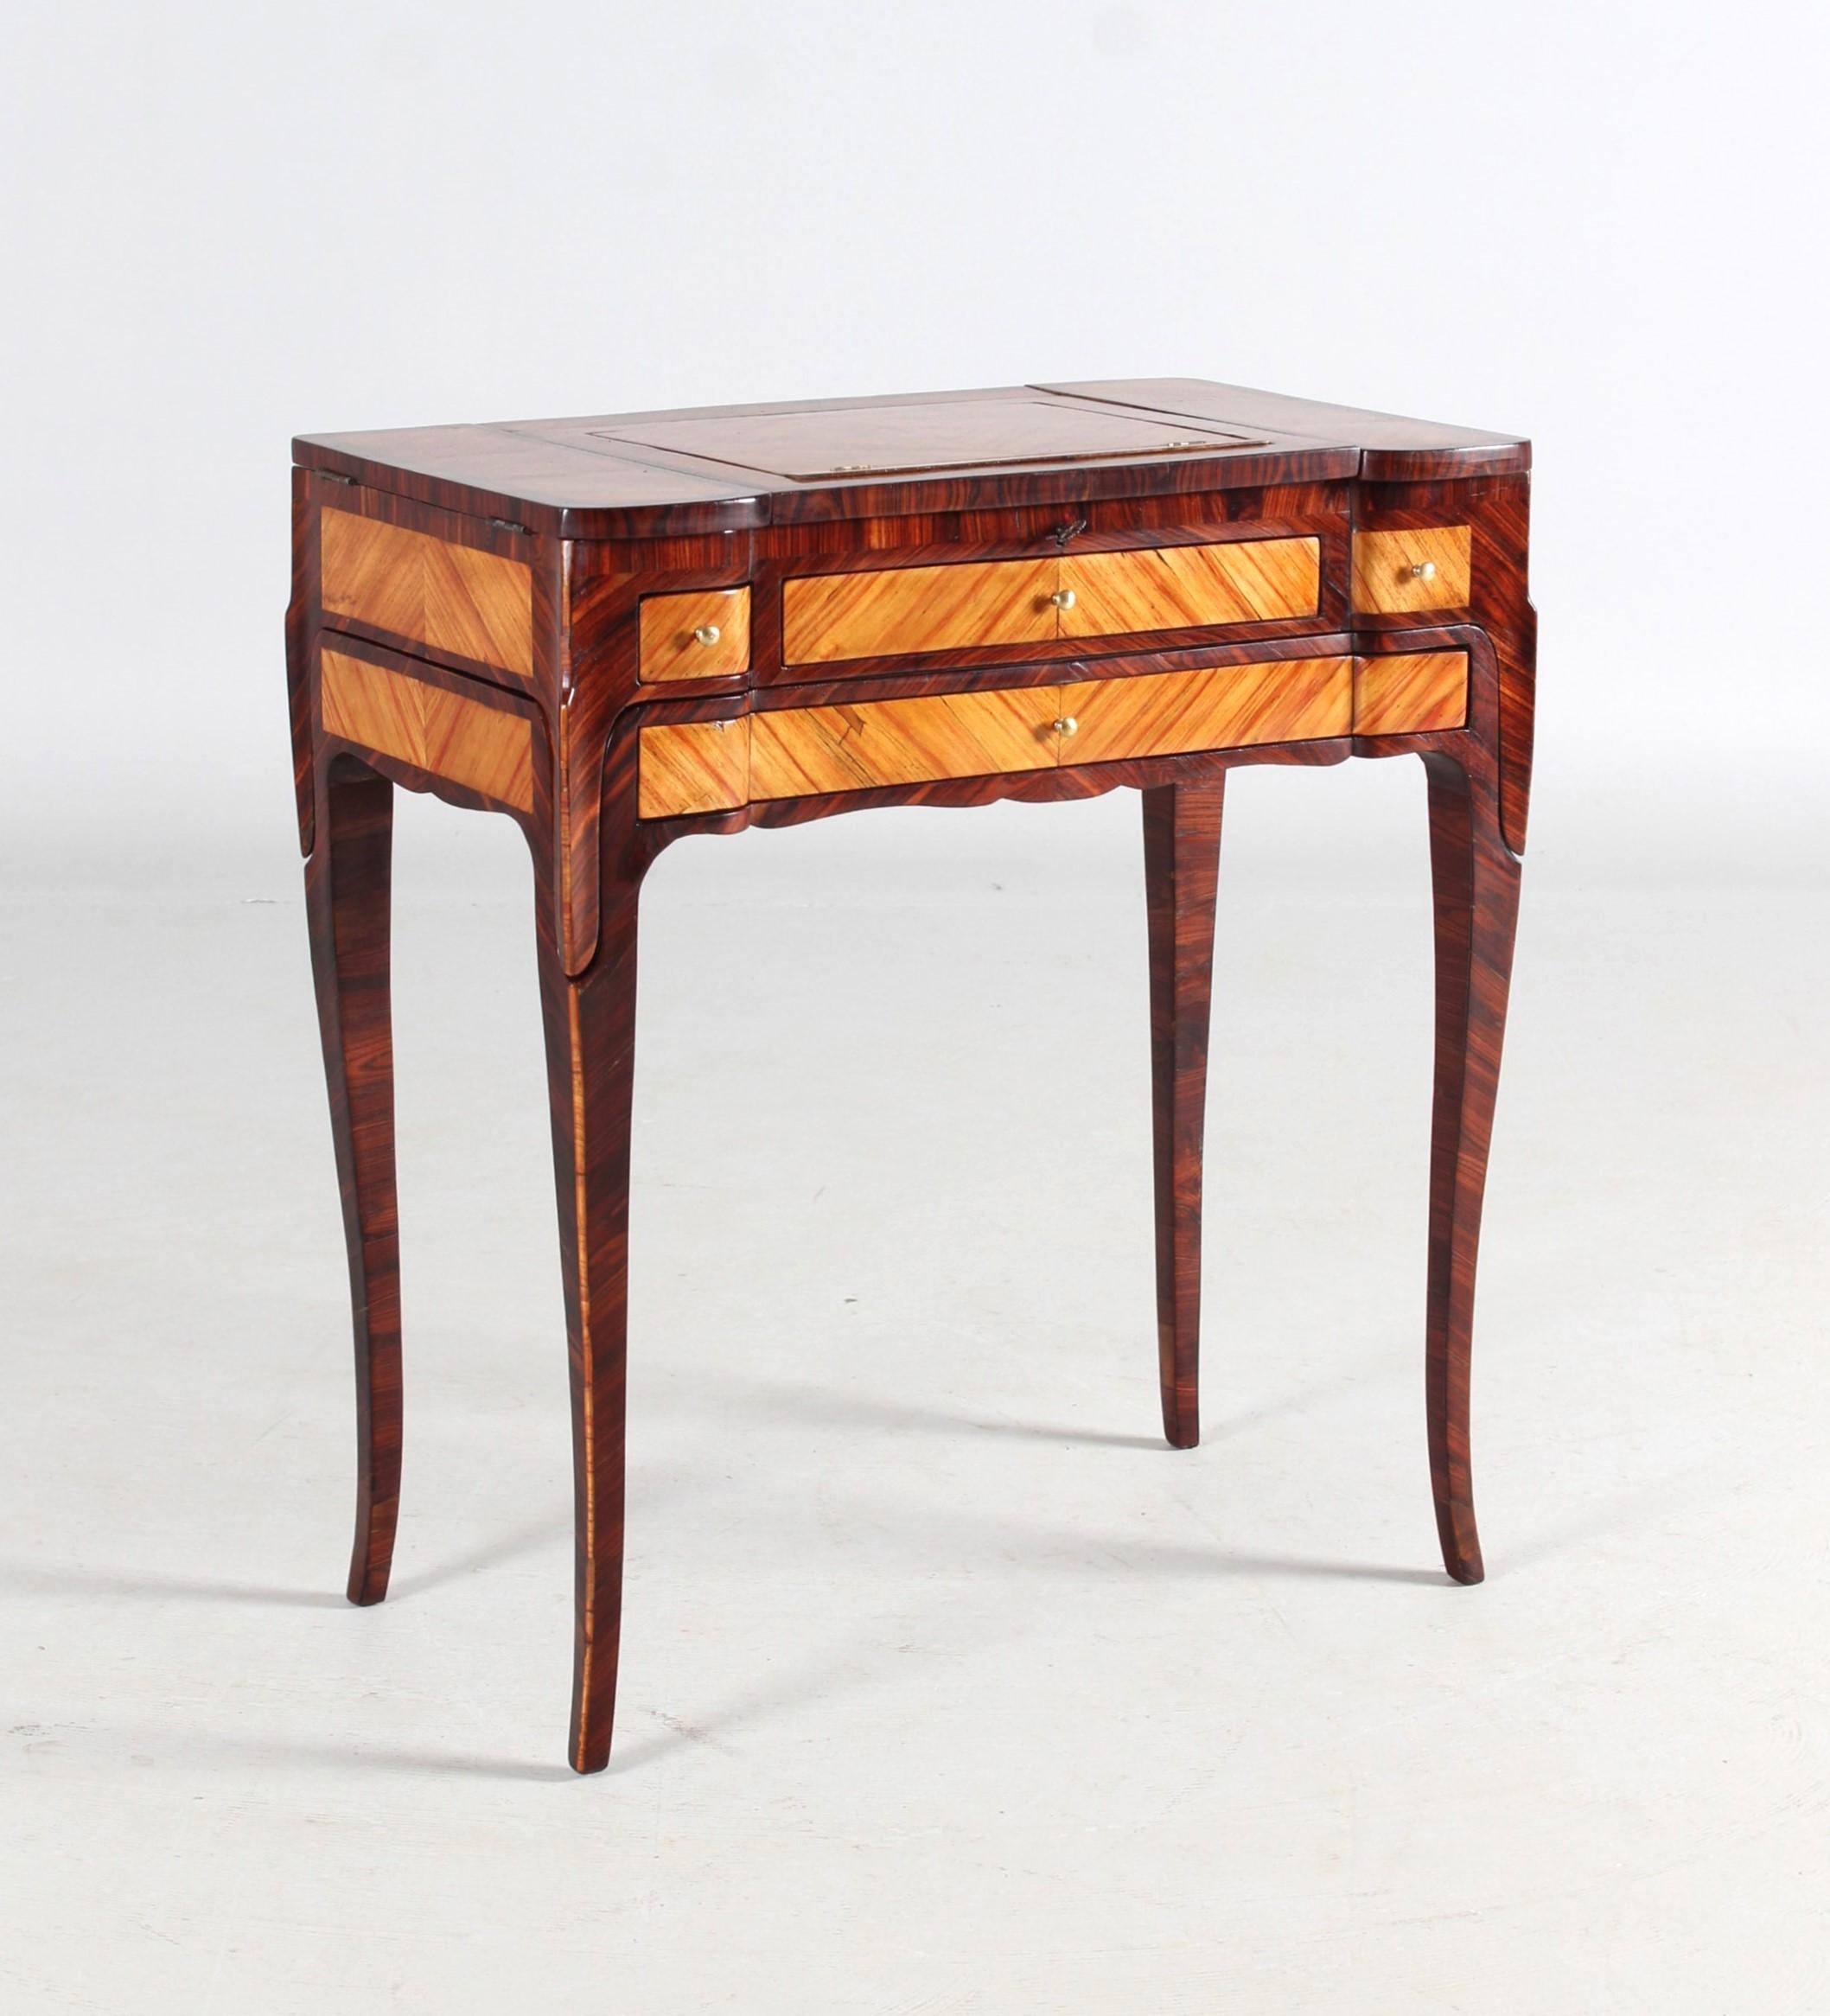 18th Century Coiffeuse and reading table - so-called Table d'Accouchée

France
Rosewood
around 1760

Dimensions: H x W x D: 72 x 63 x 39 cm

Description:
Rare, two-part and multifunctional little table with neatly arranged grain patterns in light